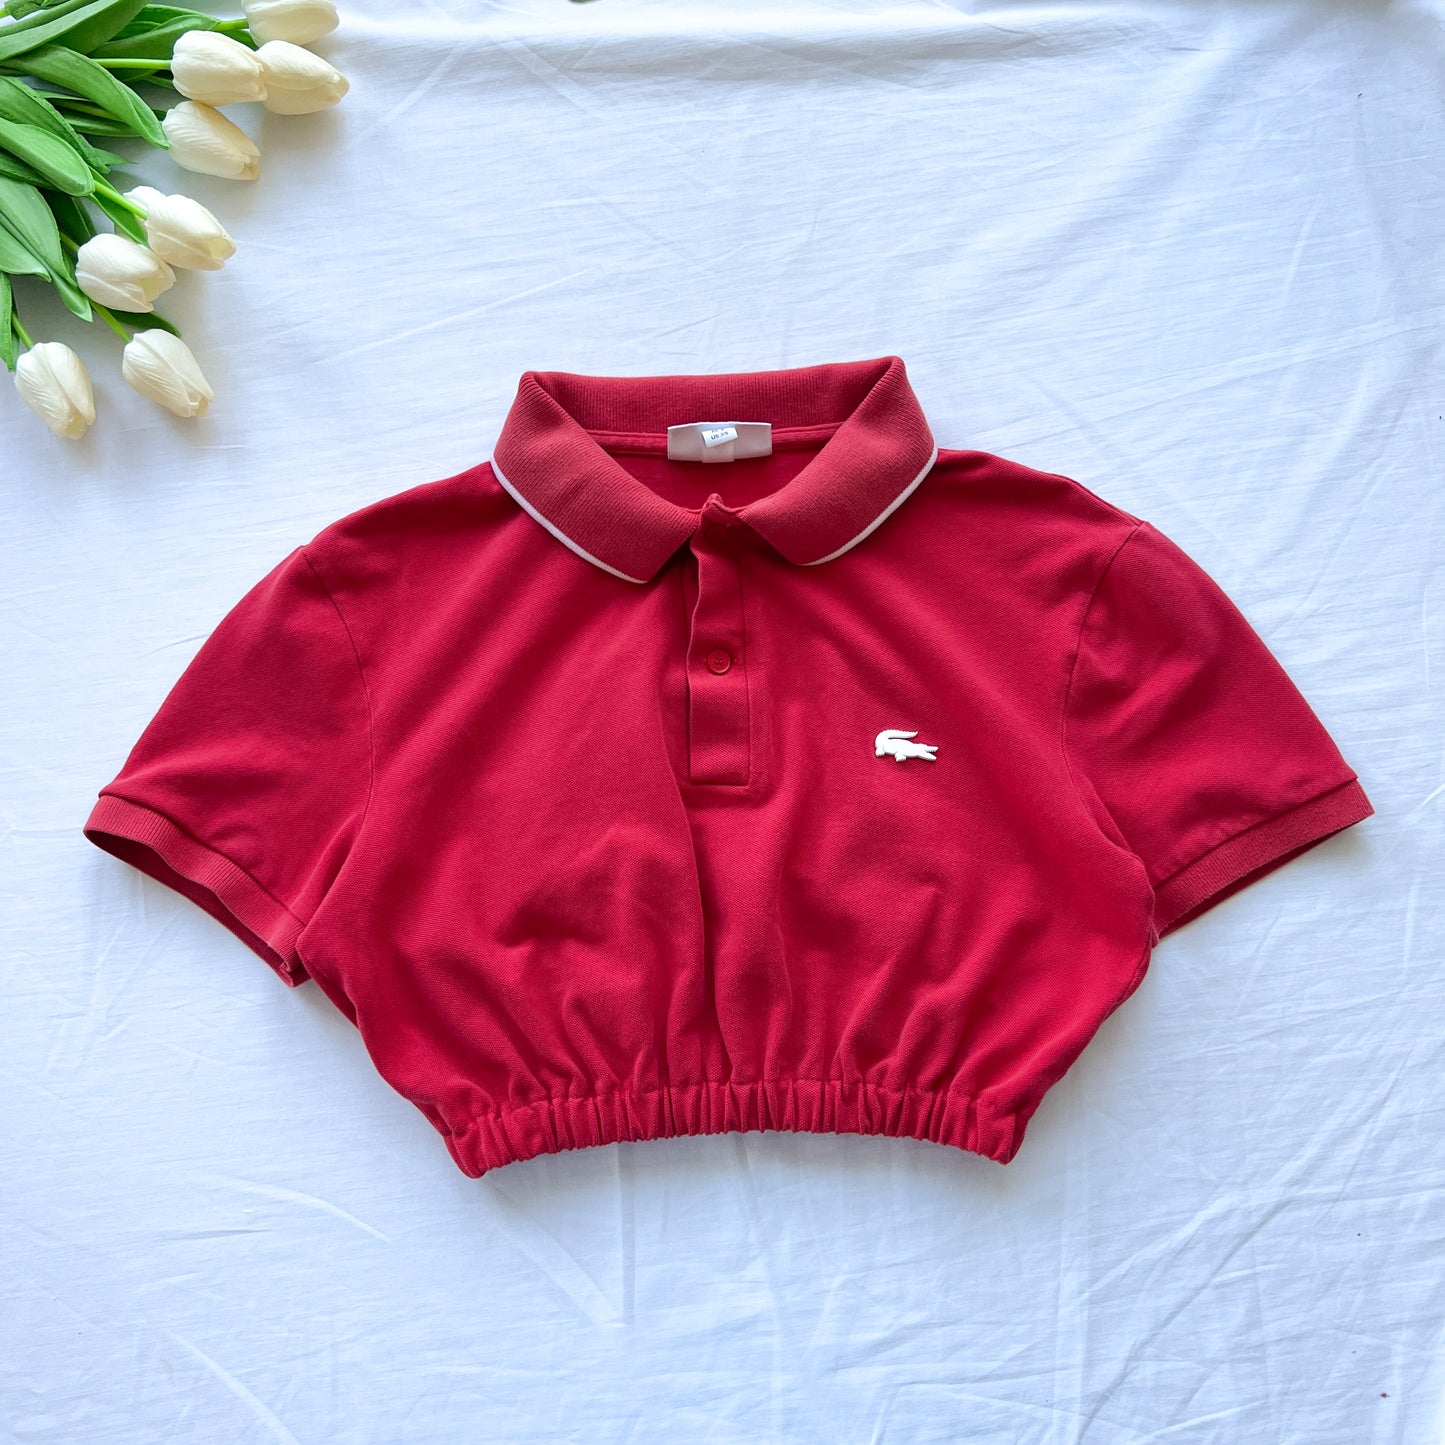 (XS) Lacoste polo crop vintage red